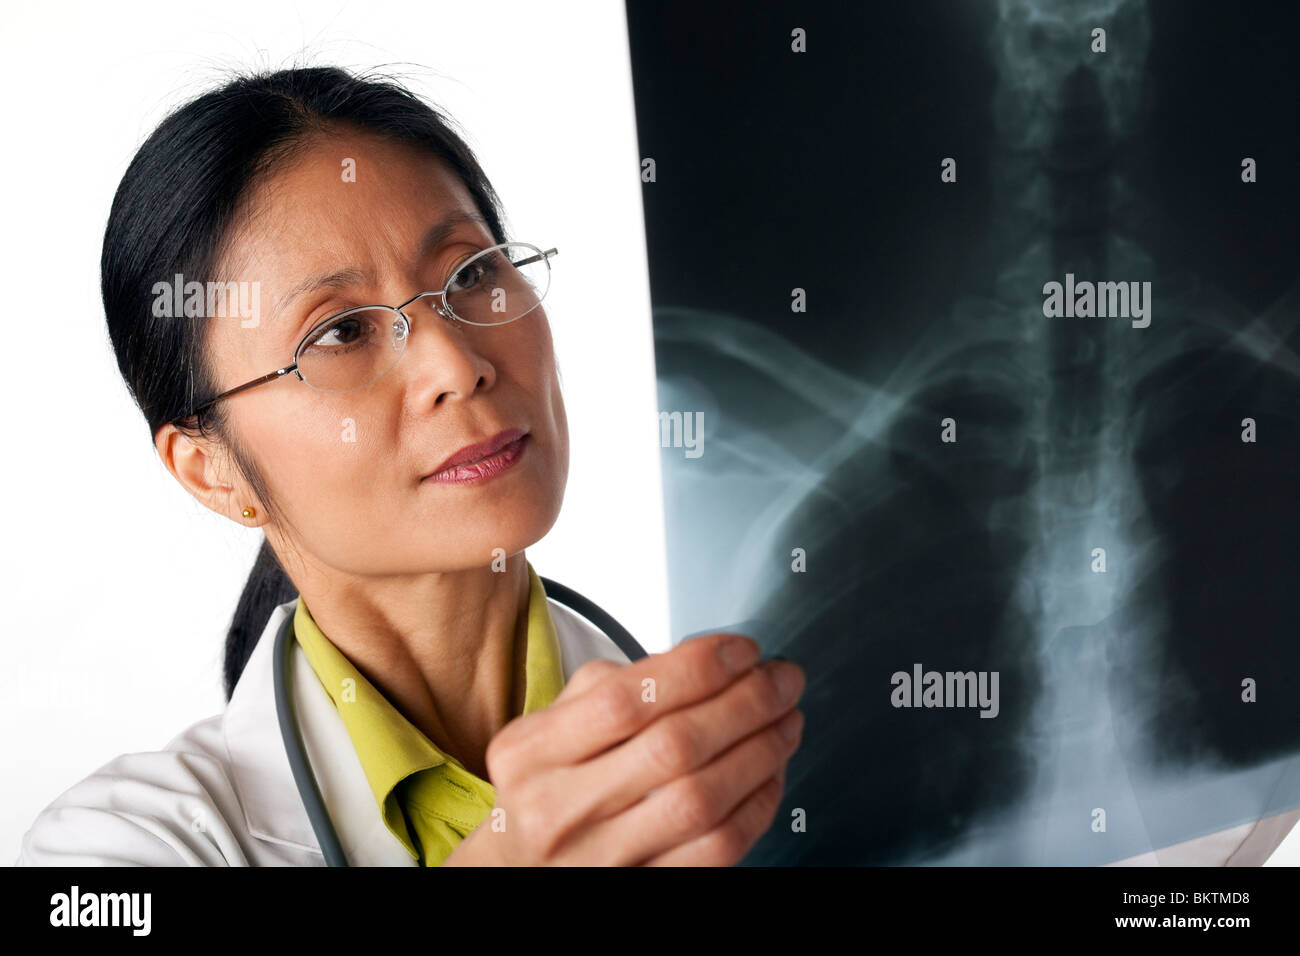 Asian female doctor looking at an x-ray of lungs. Horizontal shot. Isolated on white. Stock Photo